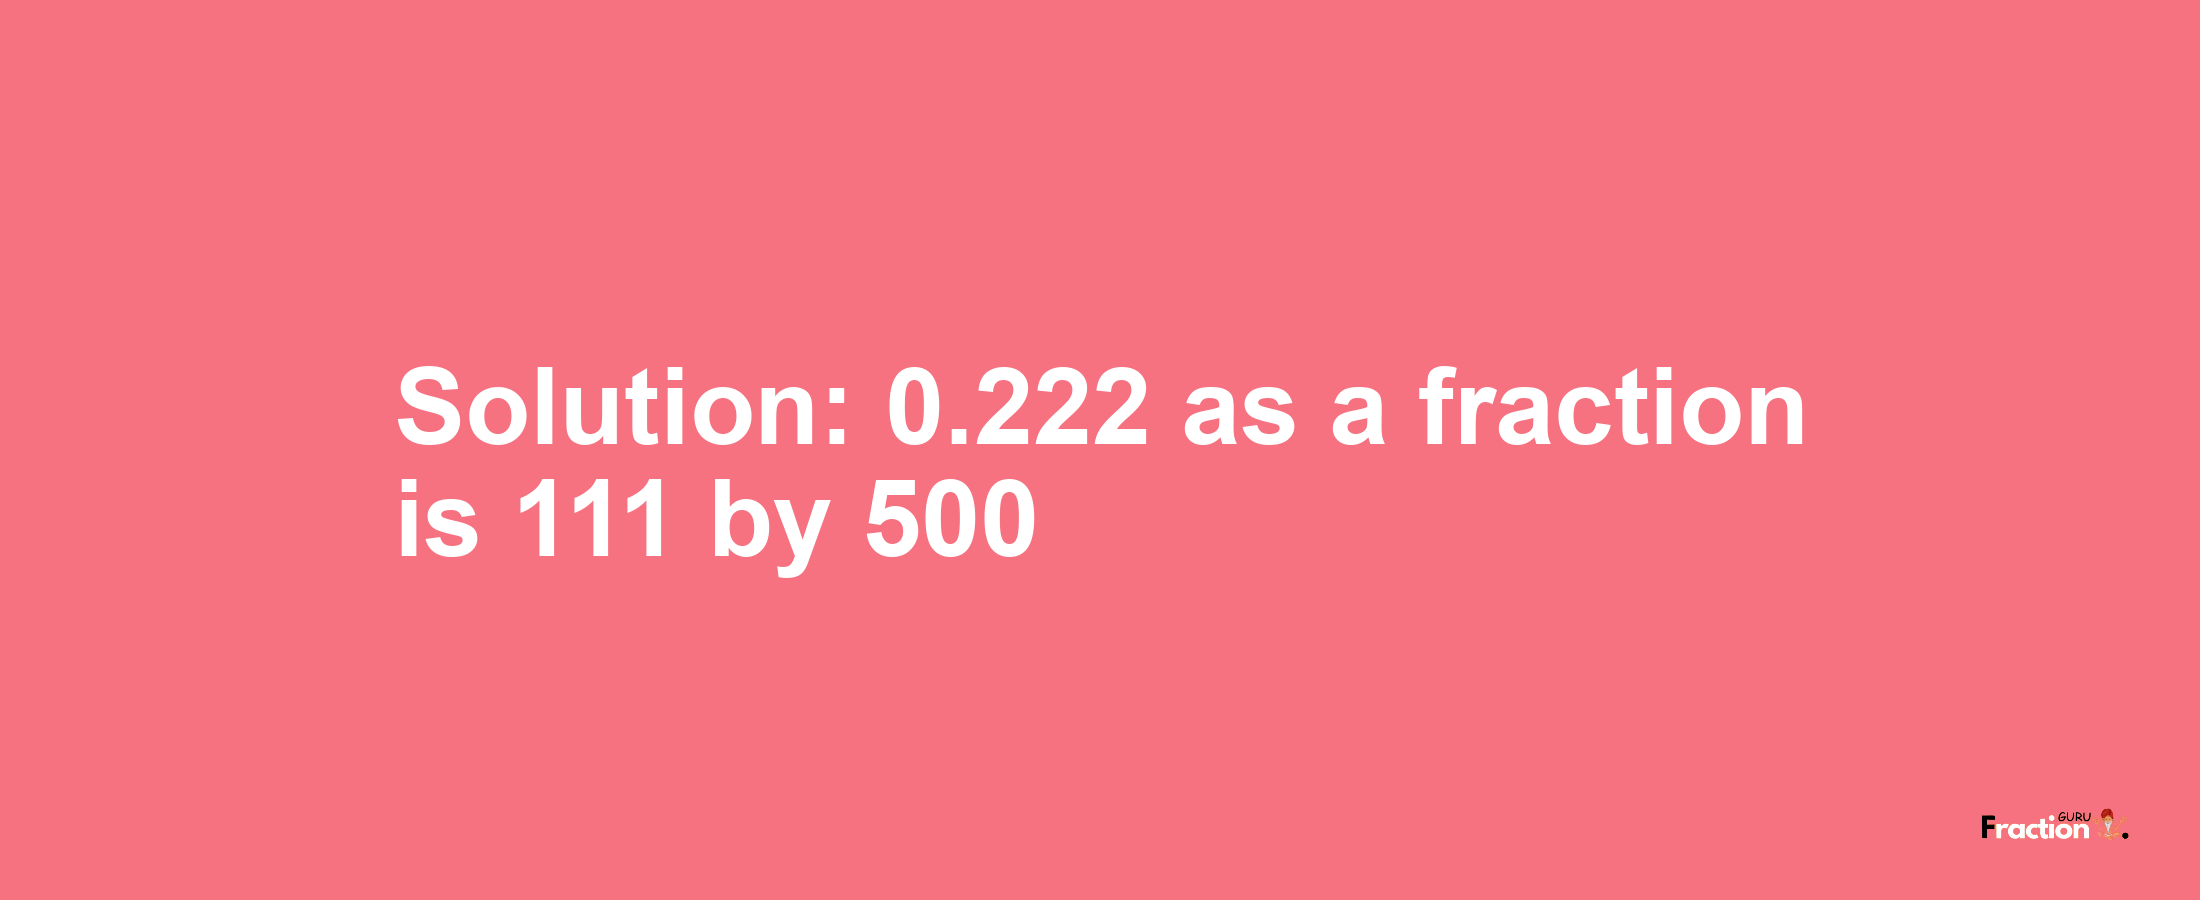 Solution:0.222 as a fraction is 111/500